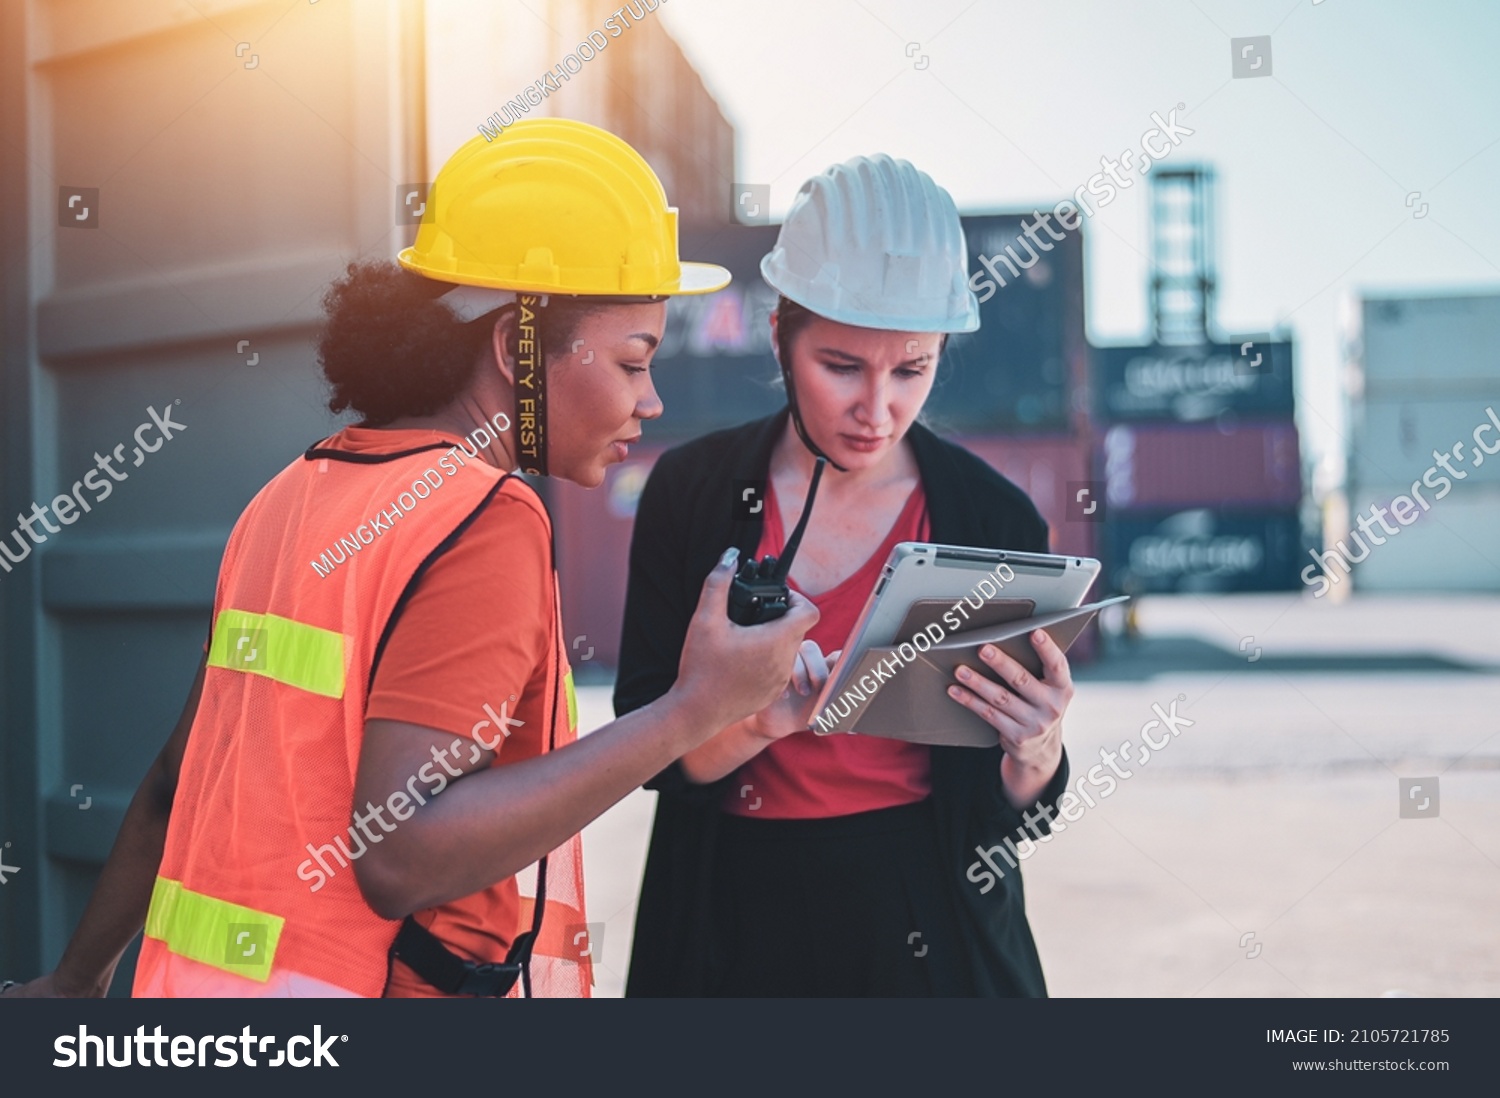 Team worker American women Work in an international shipping yard area Export and import delivery service with containers #2105721785